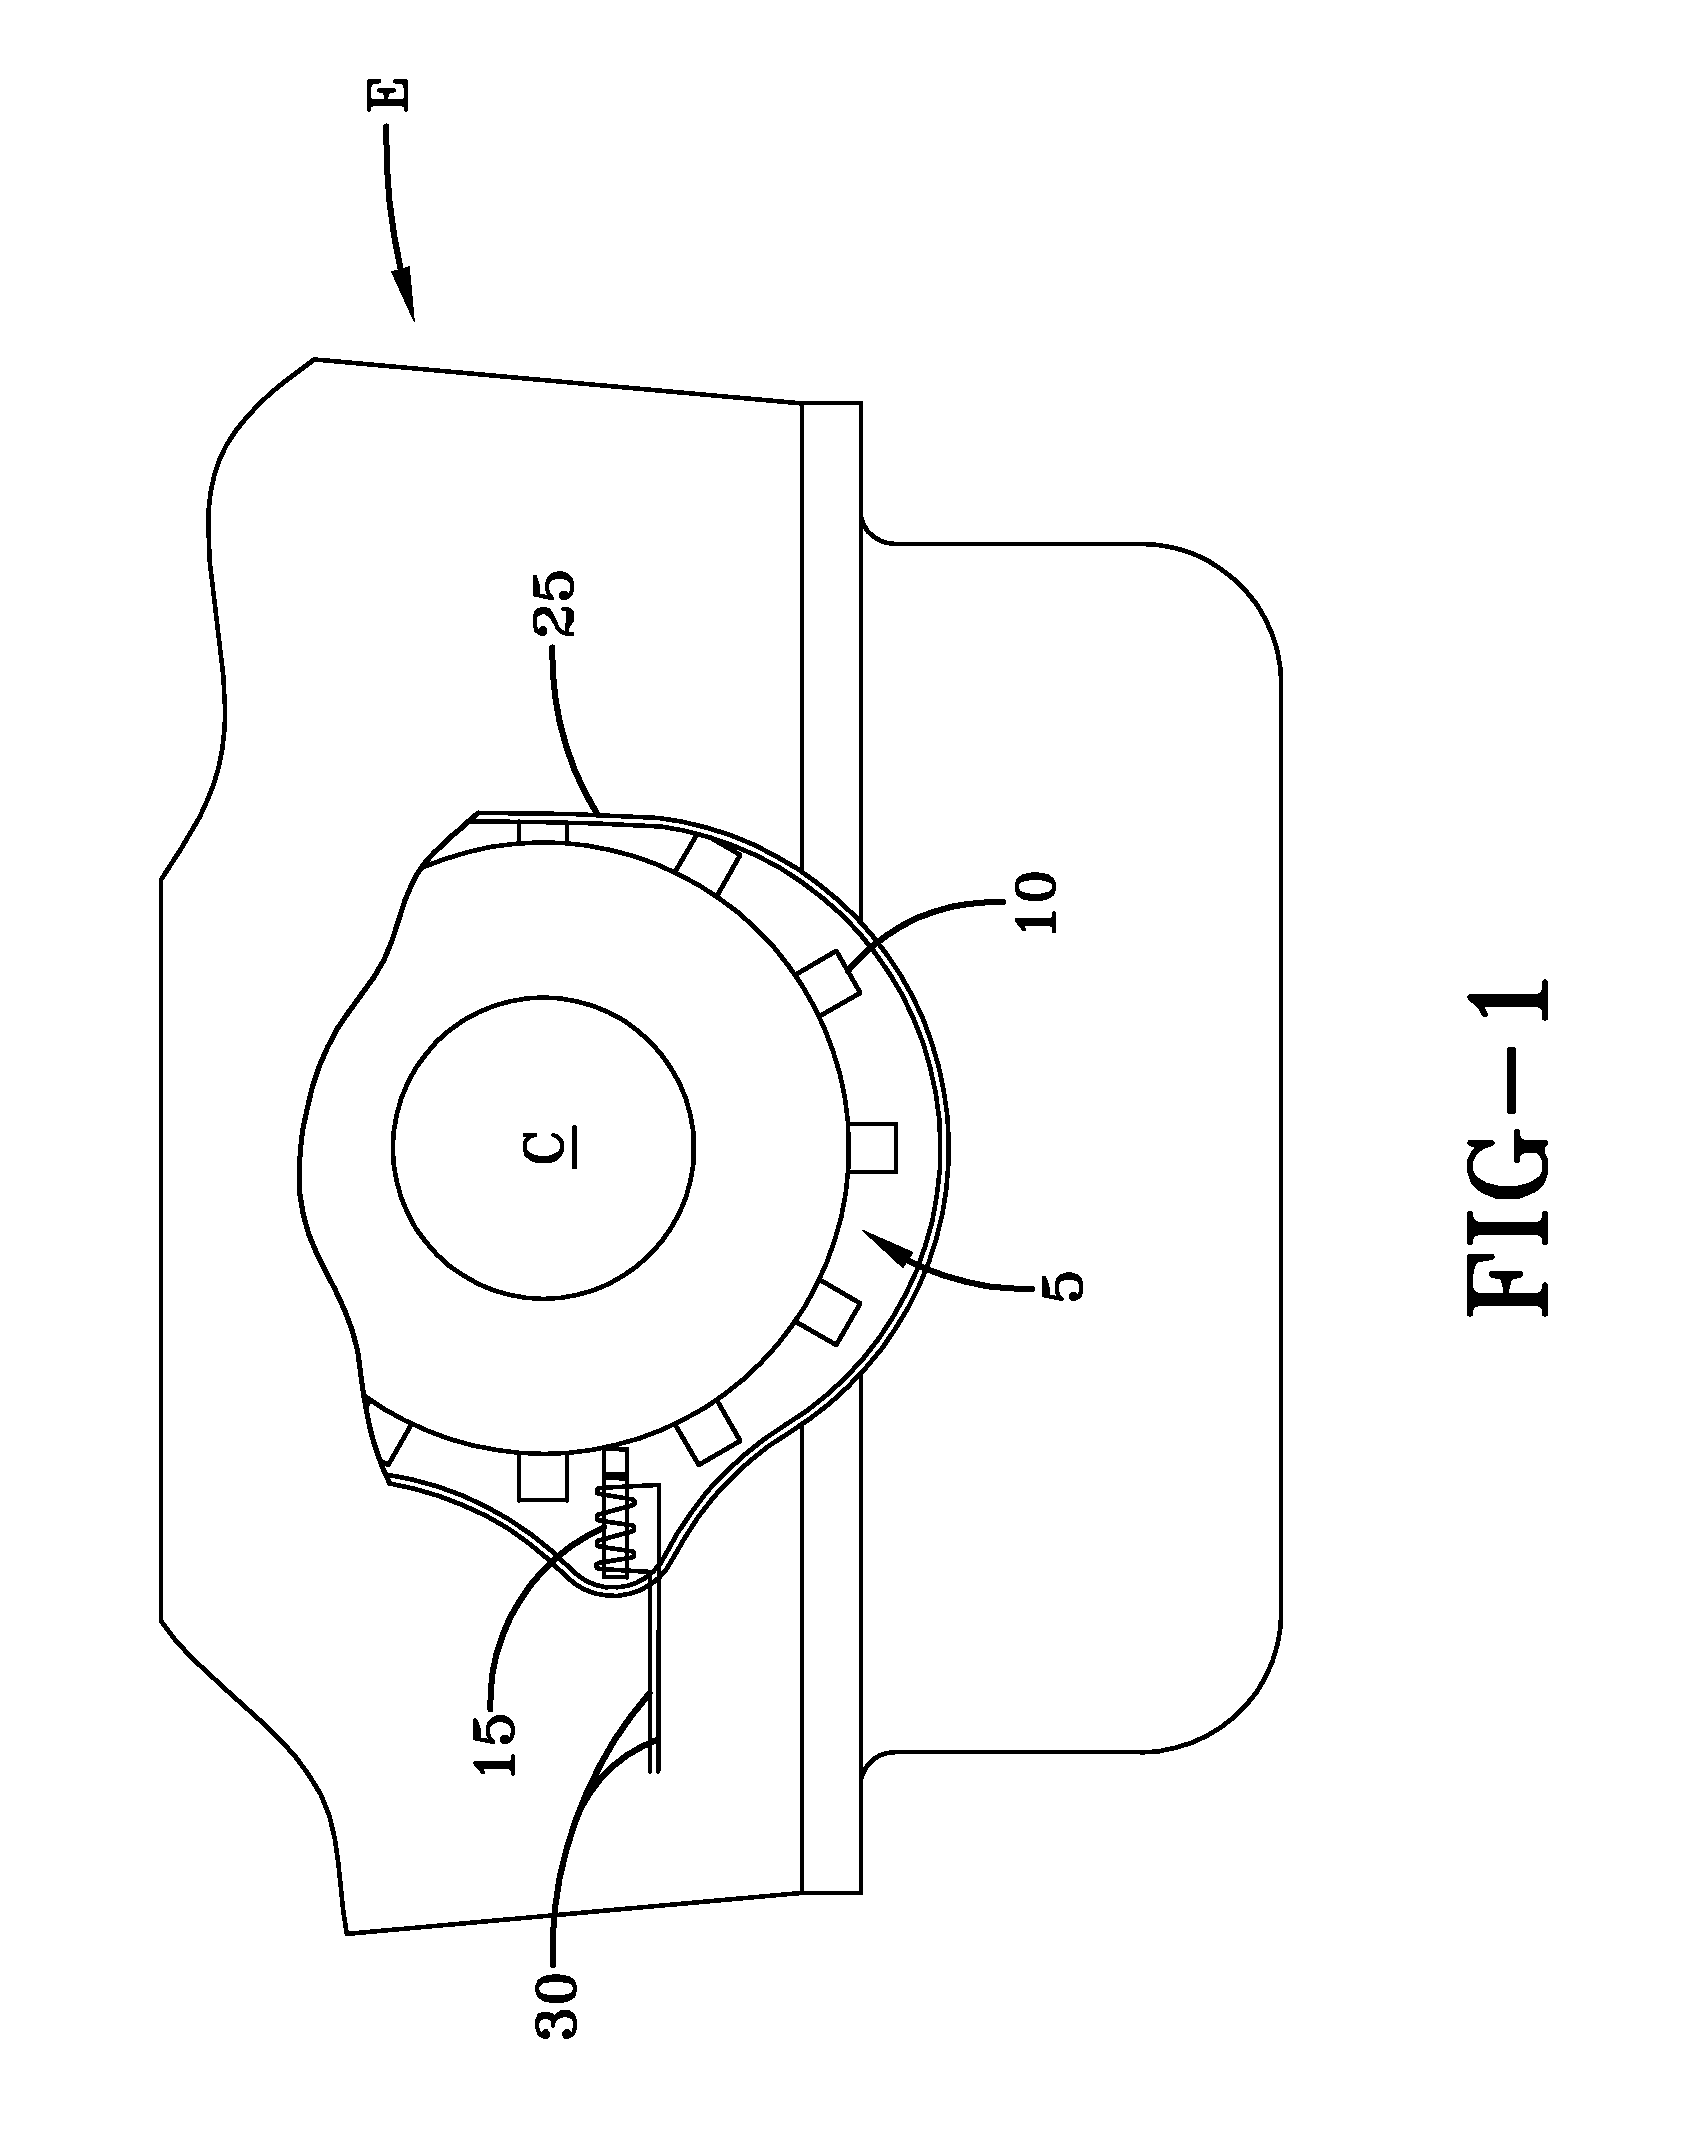 Device and method for detecting vehicle engine pulse generator plate tooth defects